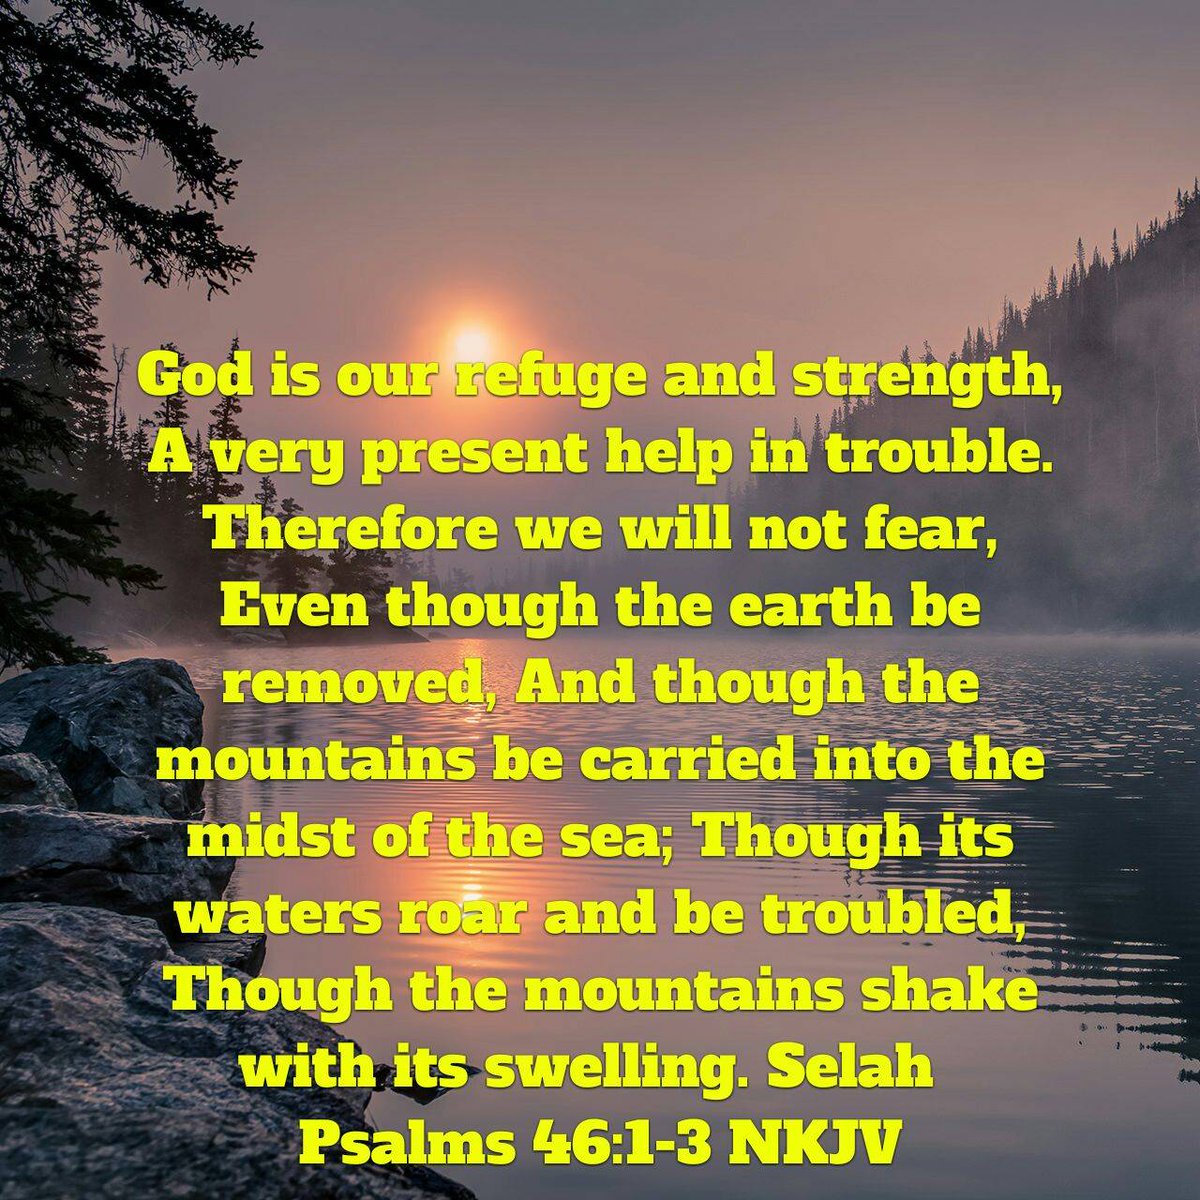 Psalms 46:1-3 NKJV [1] God is our refuge and strength, A very present help in trouble. [2] Therefore we will not fear, Even though the earth be removed, And though the mountains be carried into the midst of the sea; [3] Though its waters roar and be troubled, Though the.....